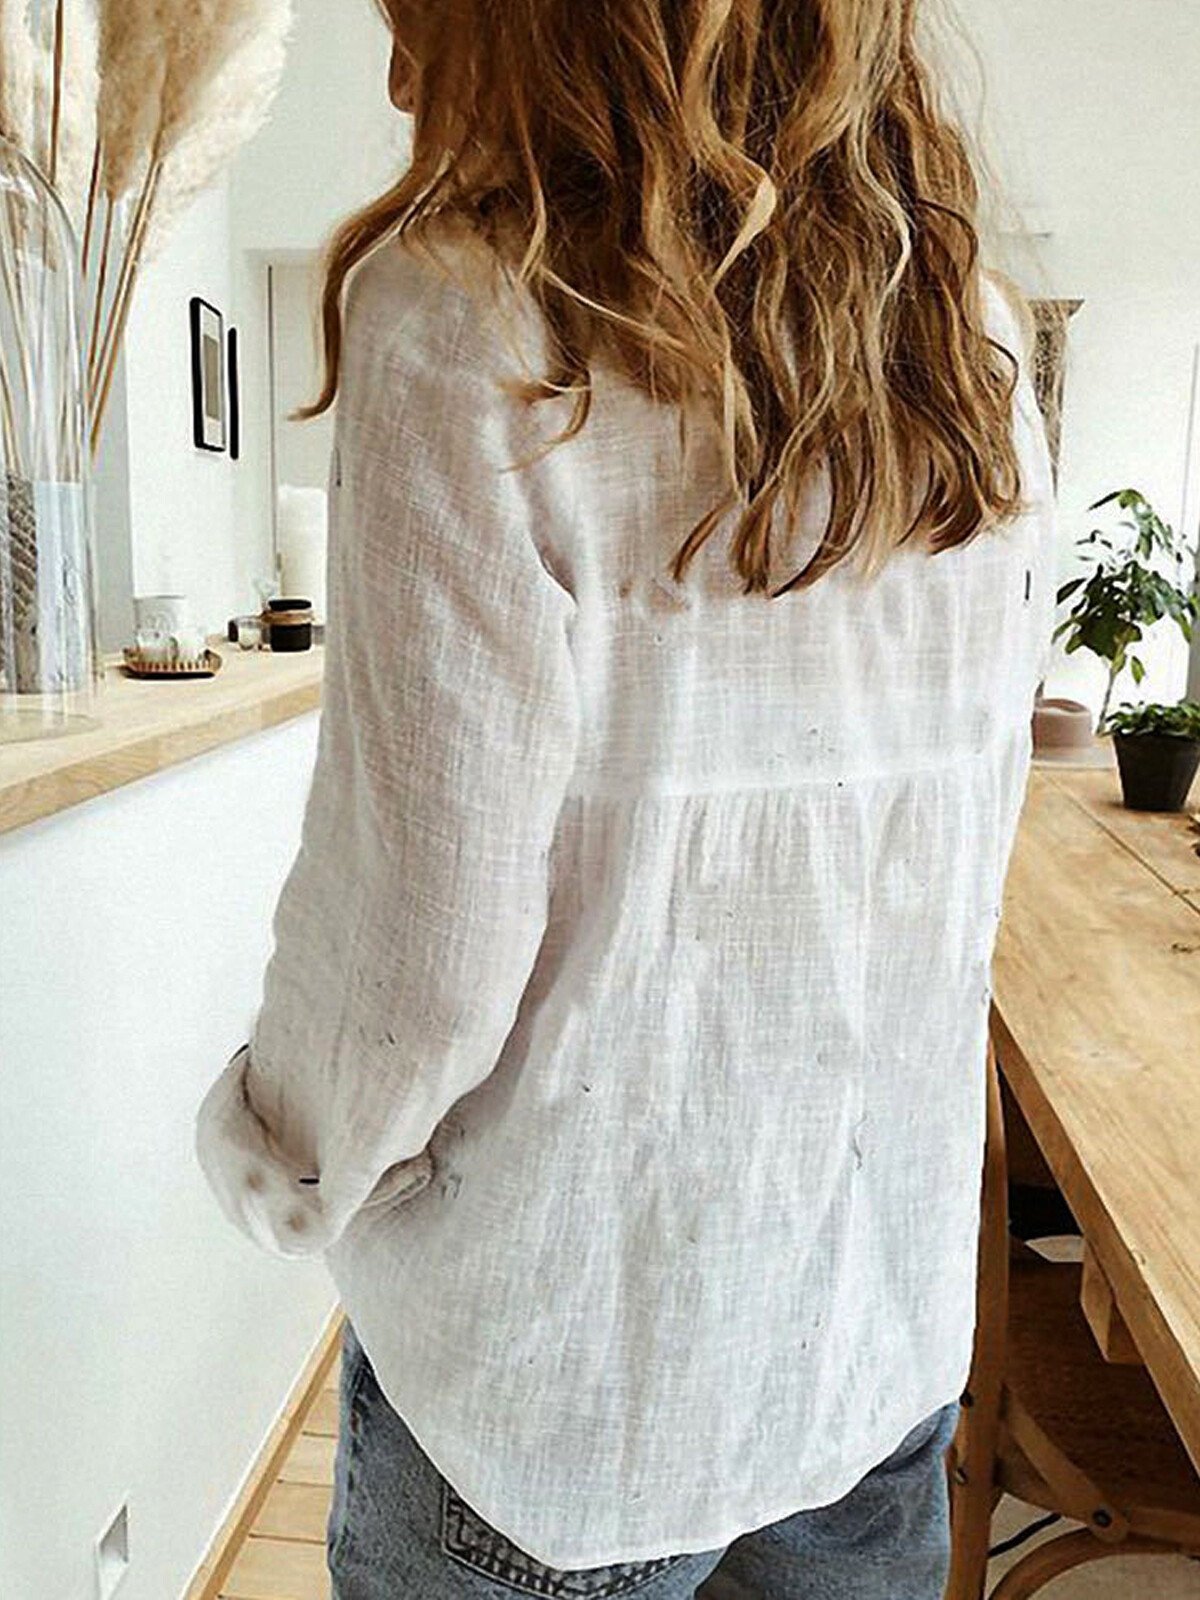 Women's Pure Color Casual Shirt